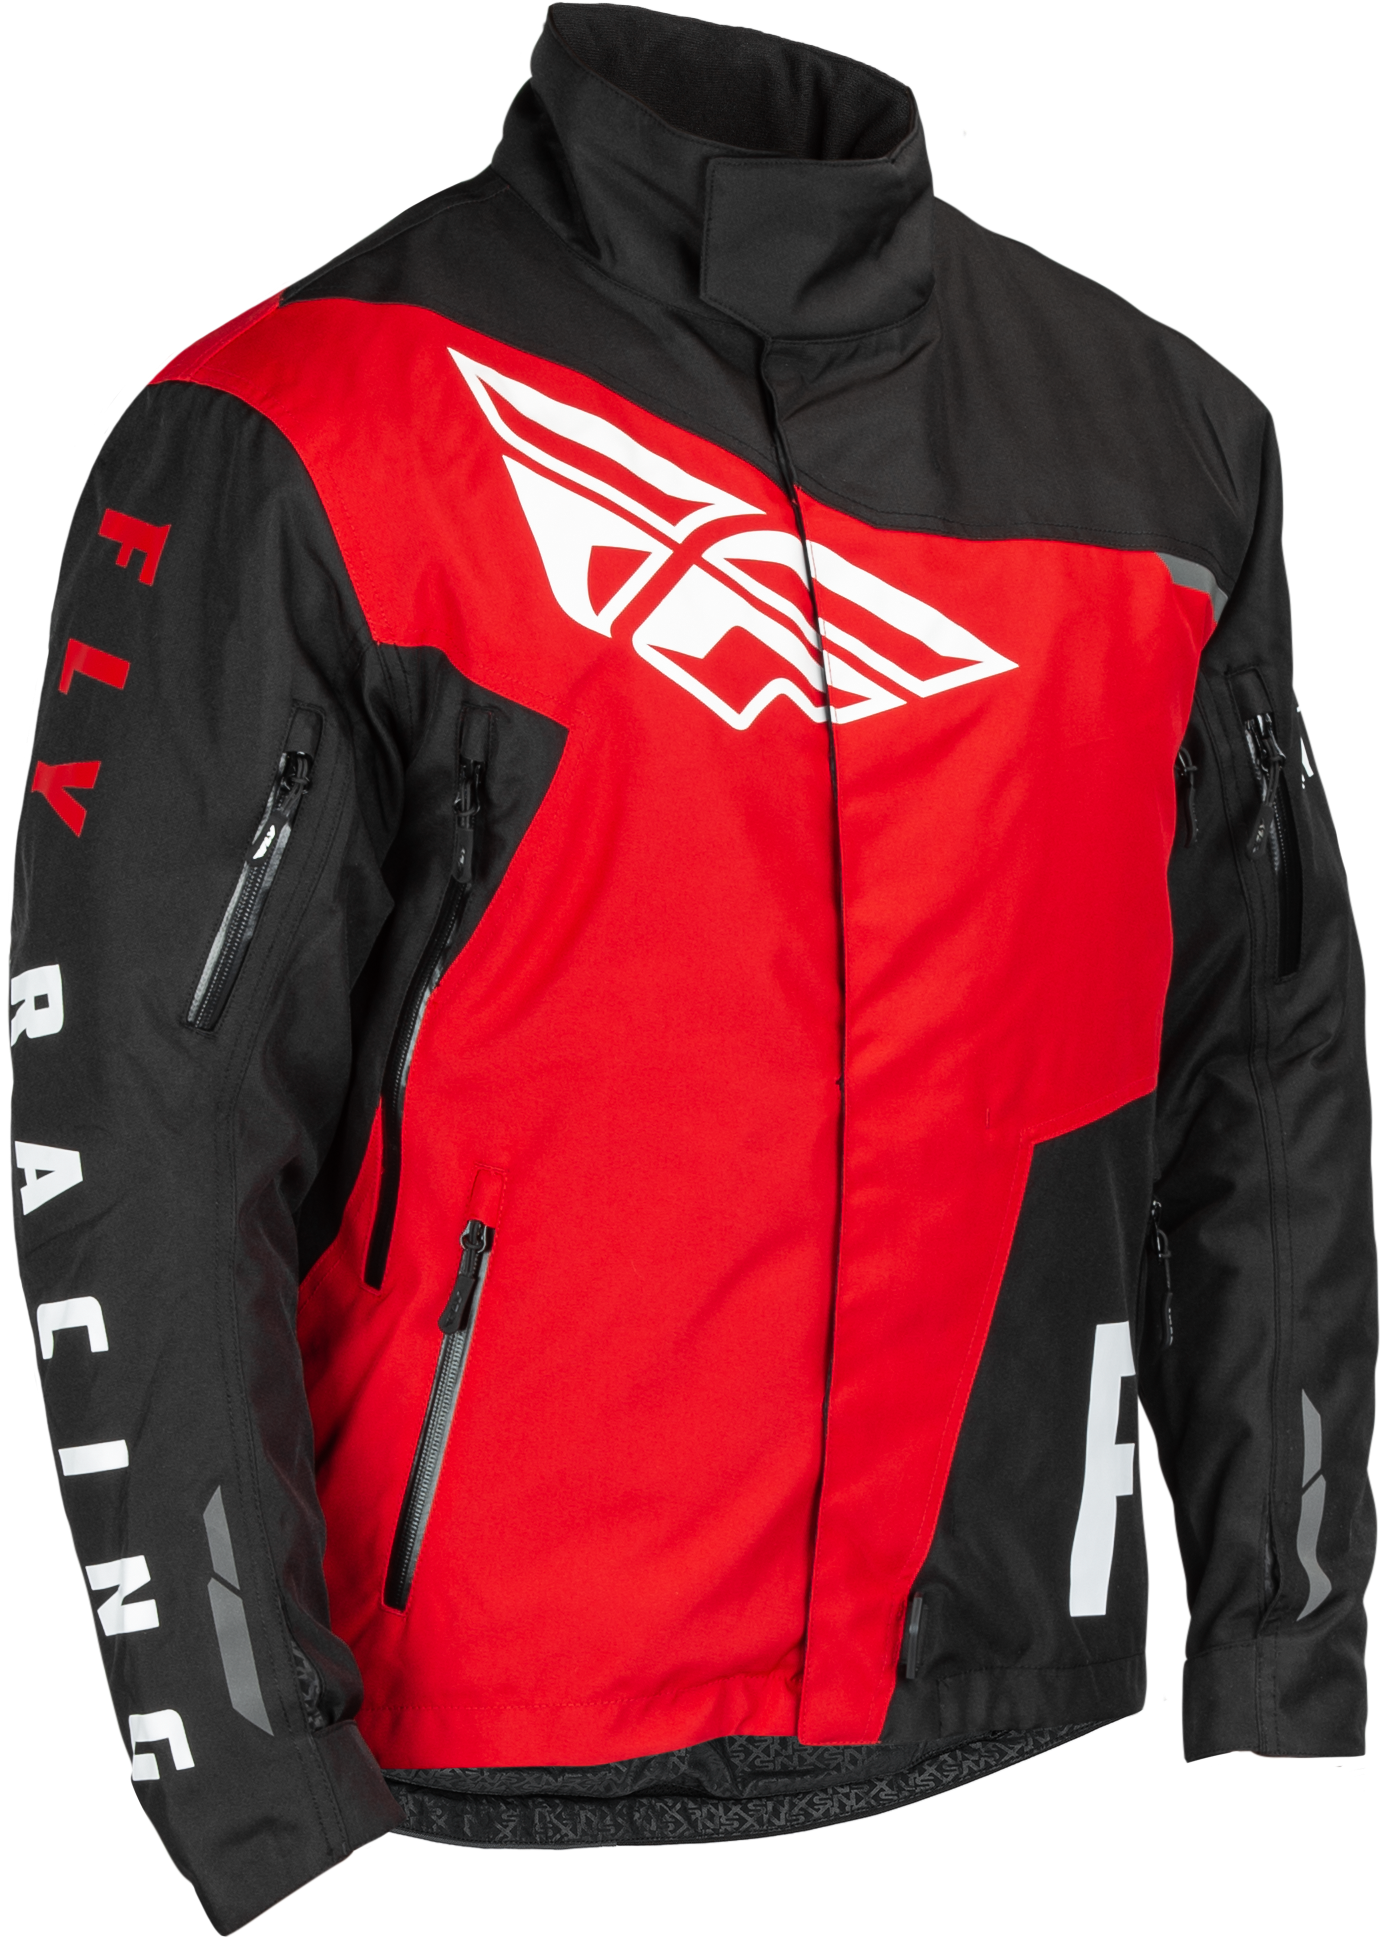 FLY RACING Snx Pro Jacket Black/Red Sm 470-5402S